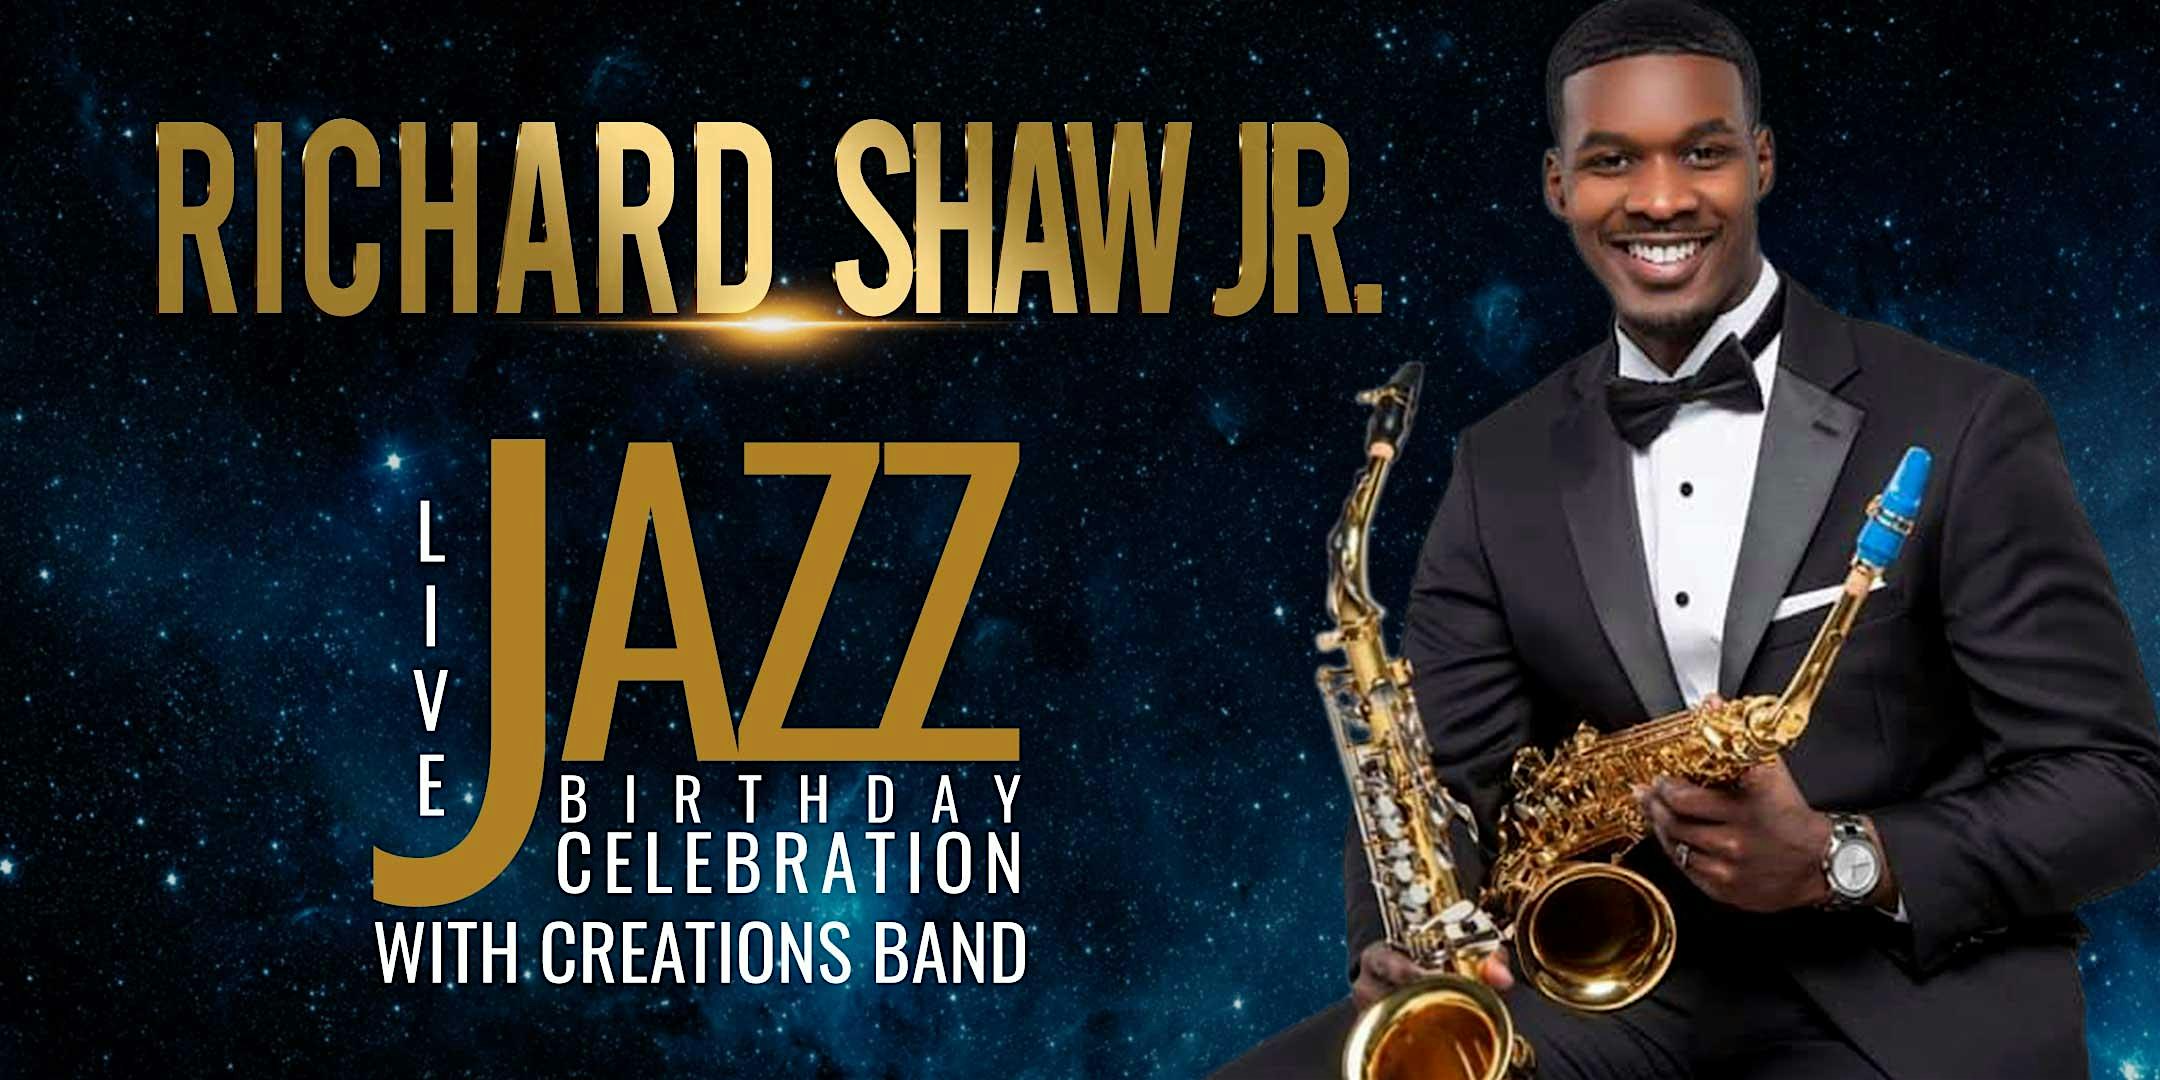 RICHARD SHAW JR. & CREATIONS BAND LIVE IN CONCERT